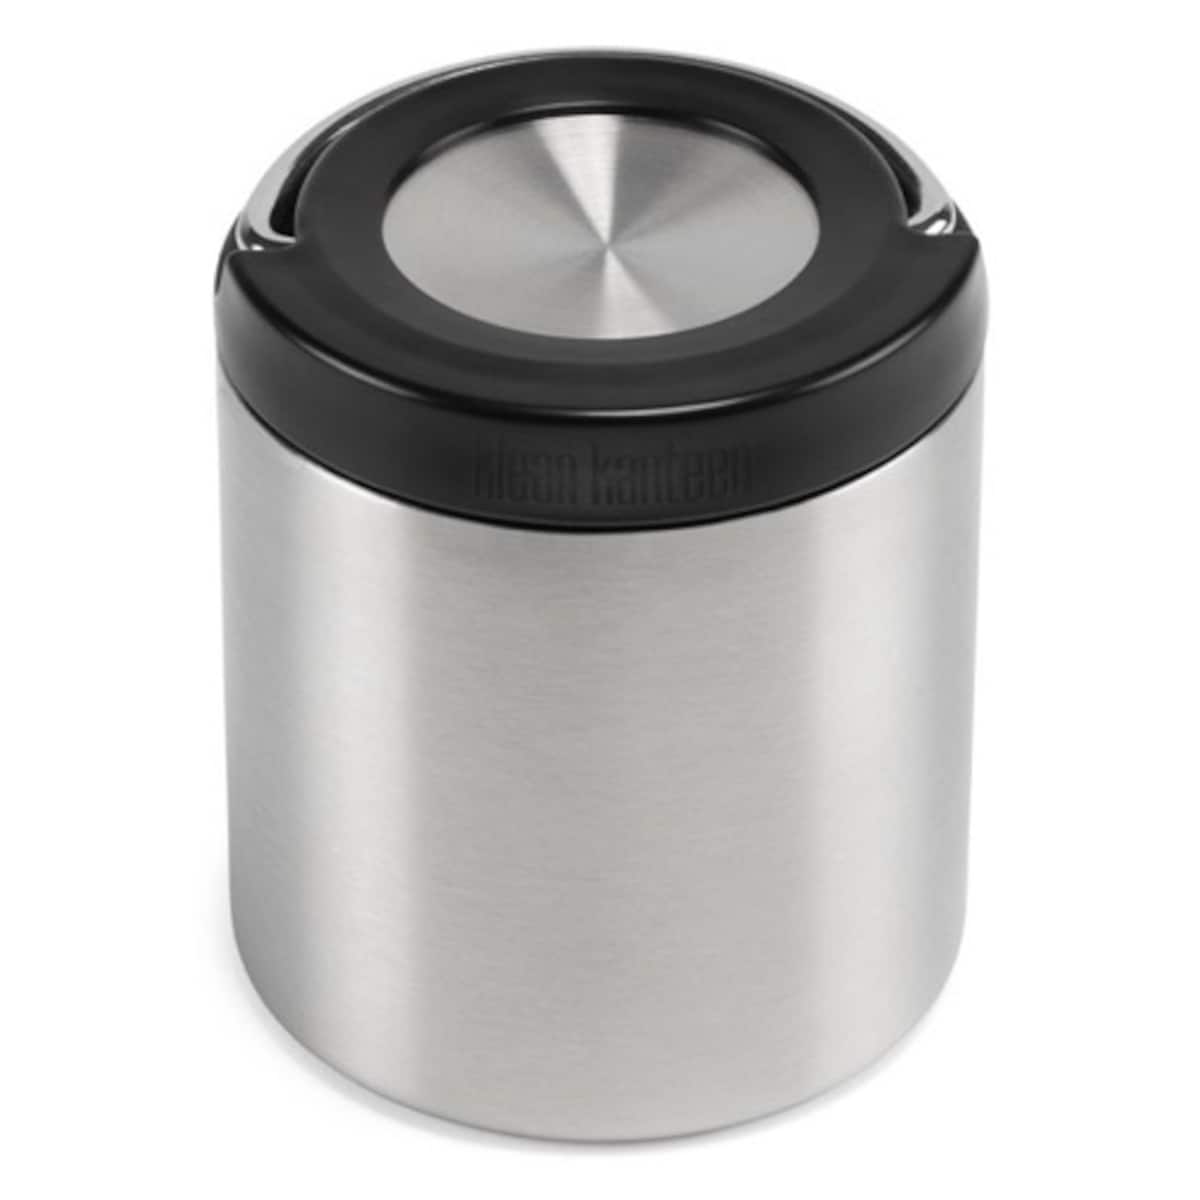 Klean Kanteen TKCanister 237ml with Insulated Lid Stainless Steel